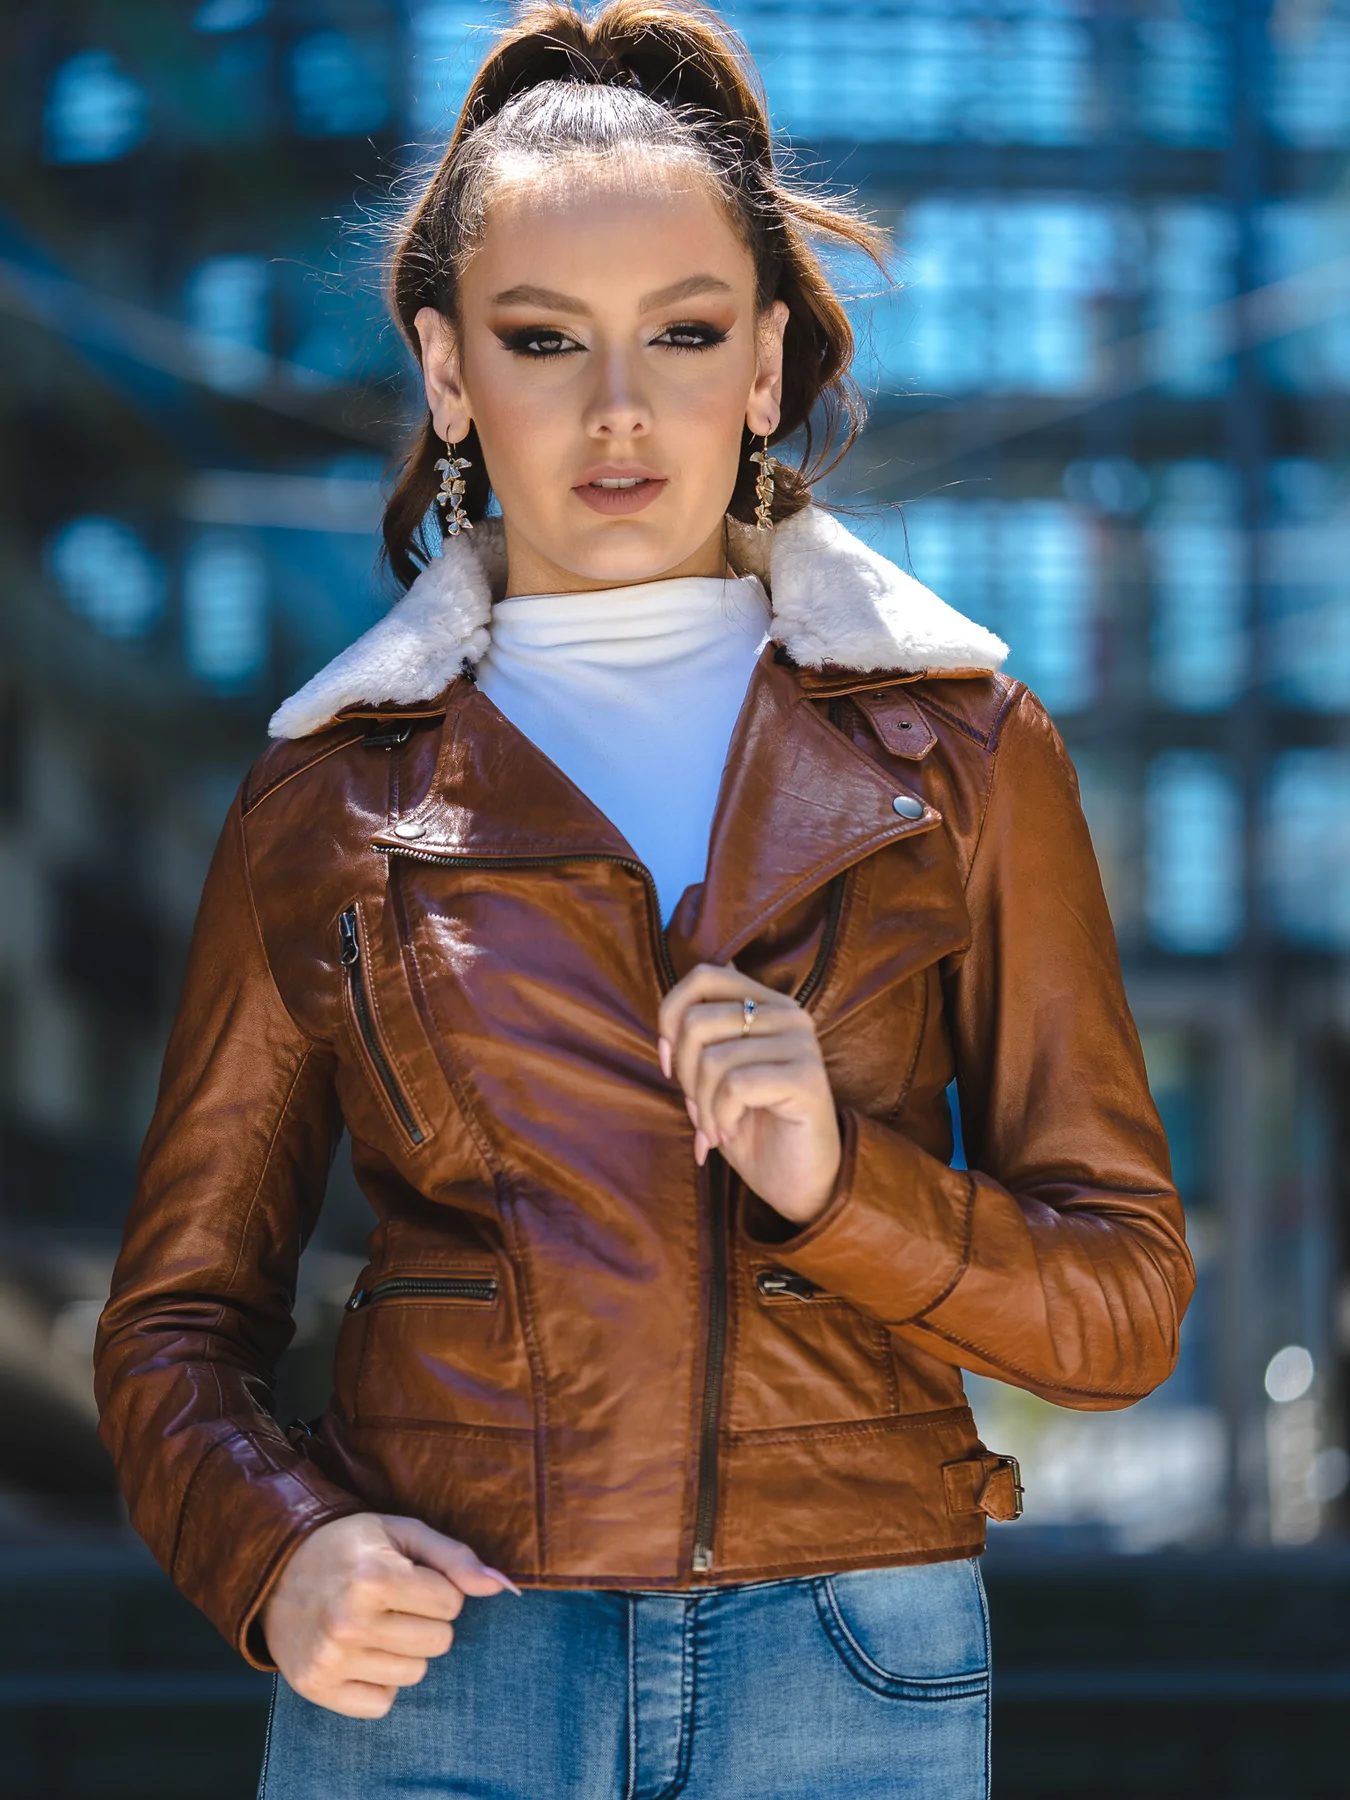 The massive luxurious look of Womens Brown Leather Jacket with Fur Collar